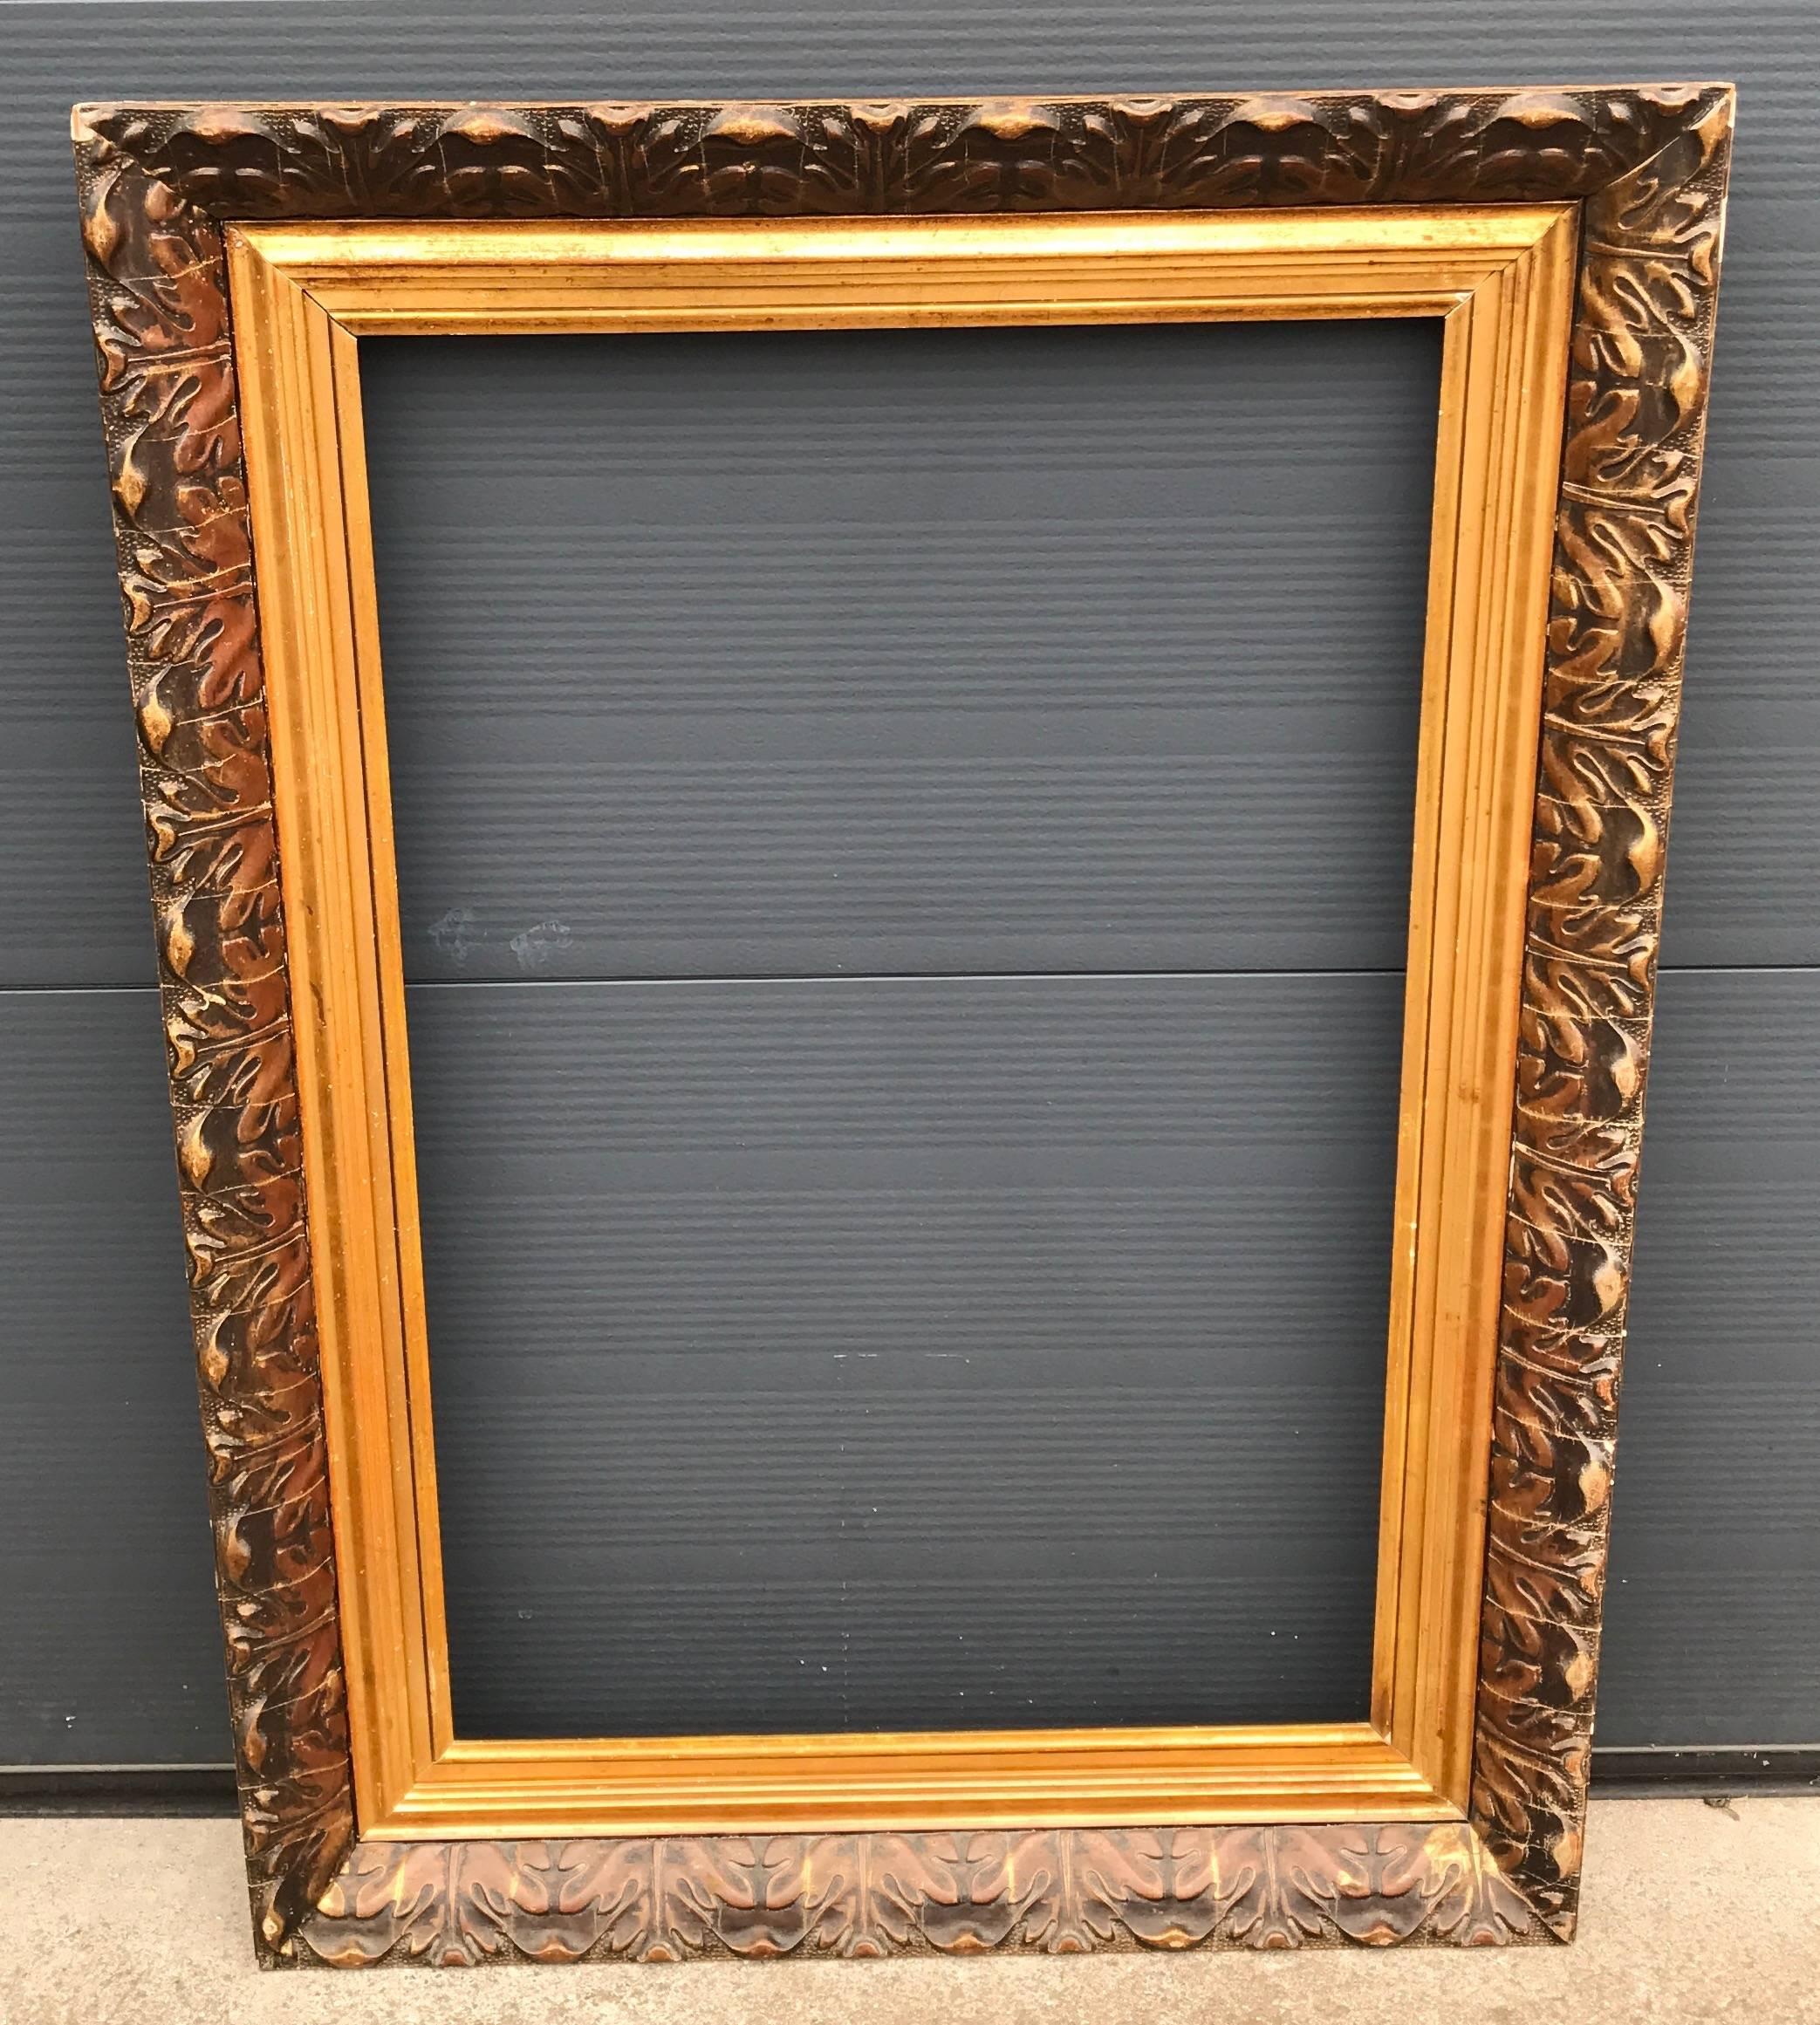 Good size and handcrafted frame for a mirror or painting.

This impressive size and shape frame is handcrafted around the turn of the century. The Arts and Crafts style leaf motifs are made from molded clay which are glued onto a wooden base.